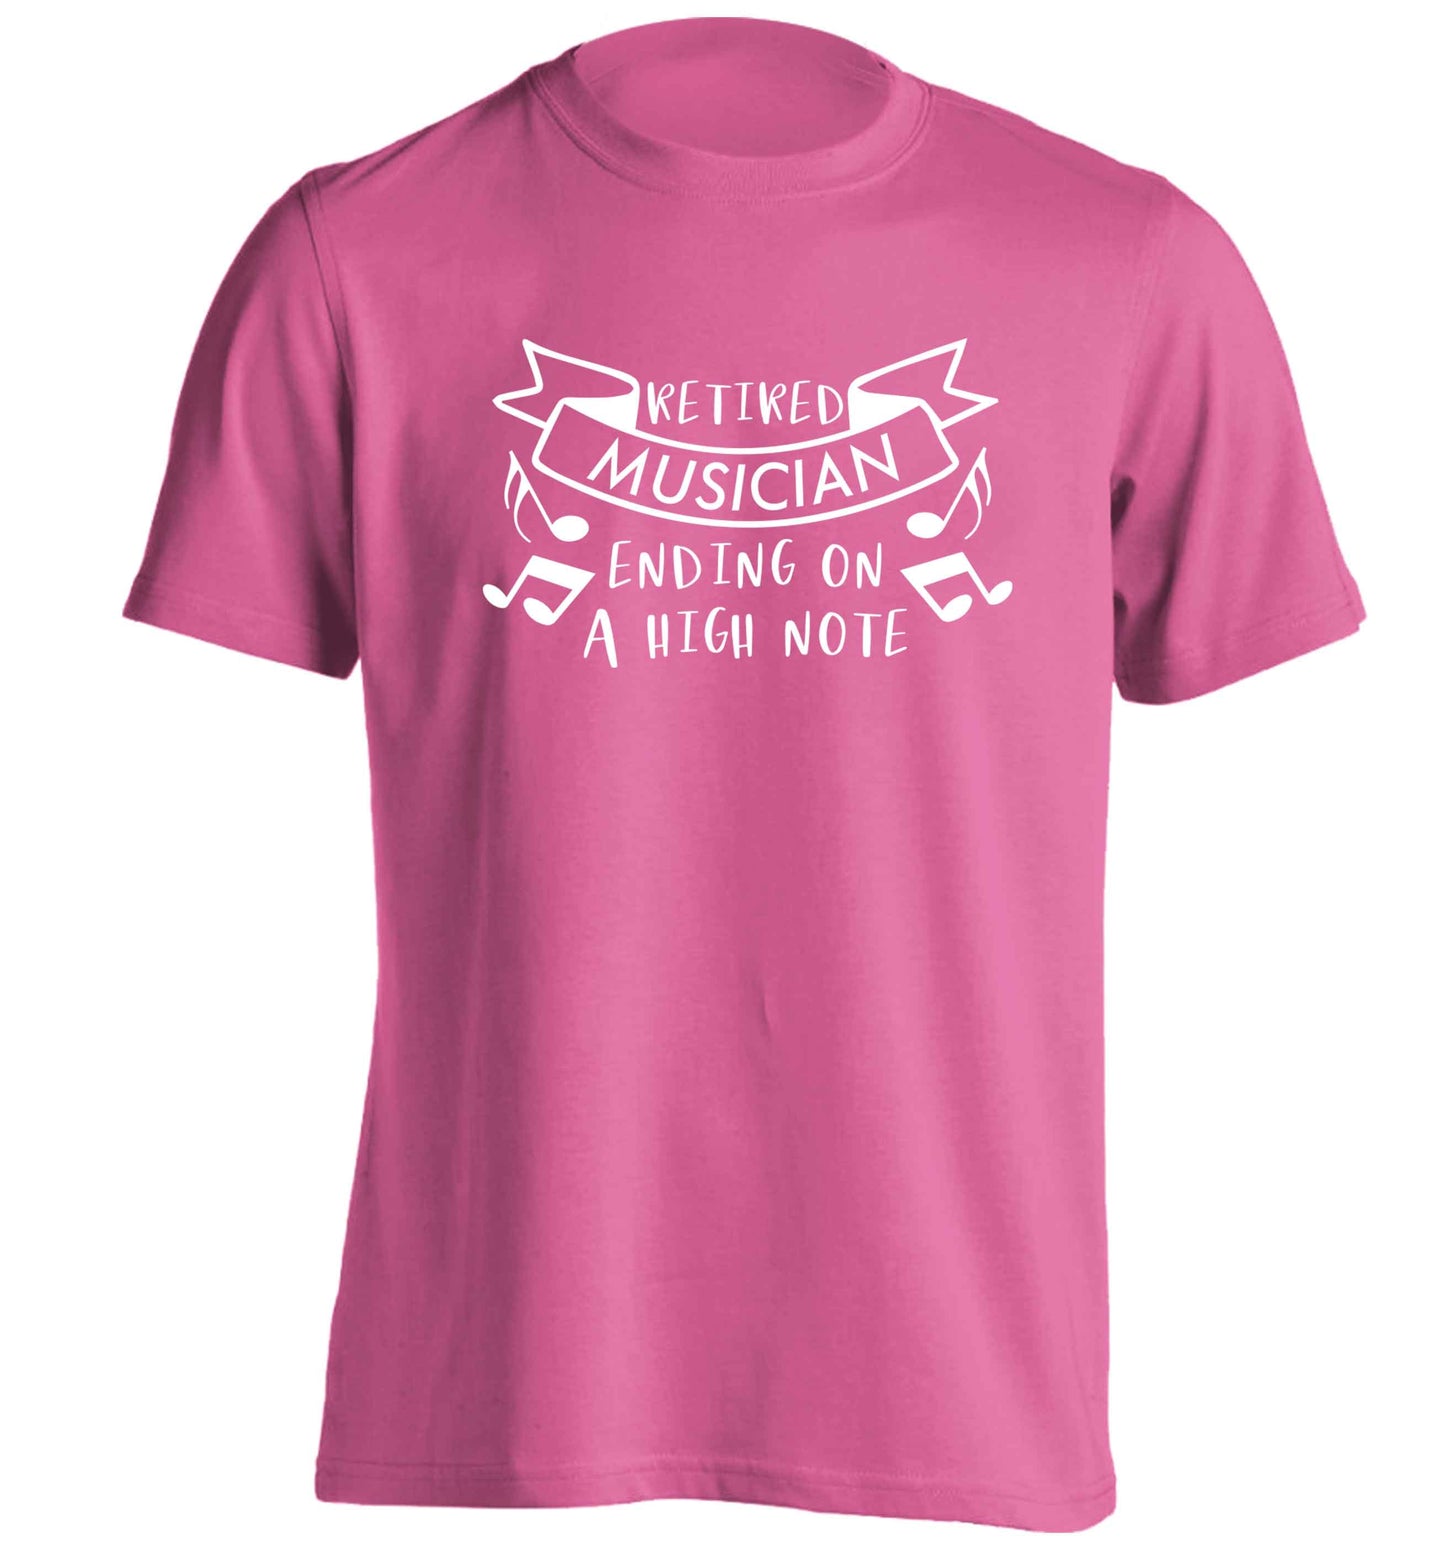 Retired musician ending on a high note adults unisex pink Tshirt 2XL